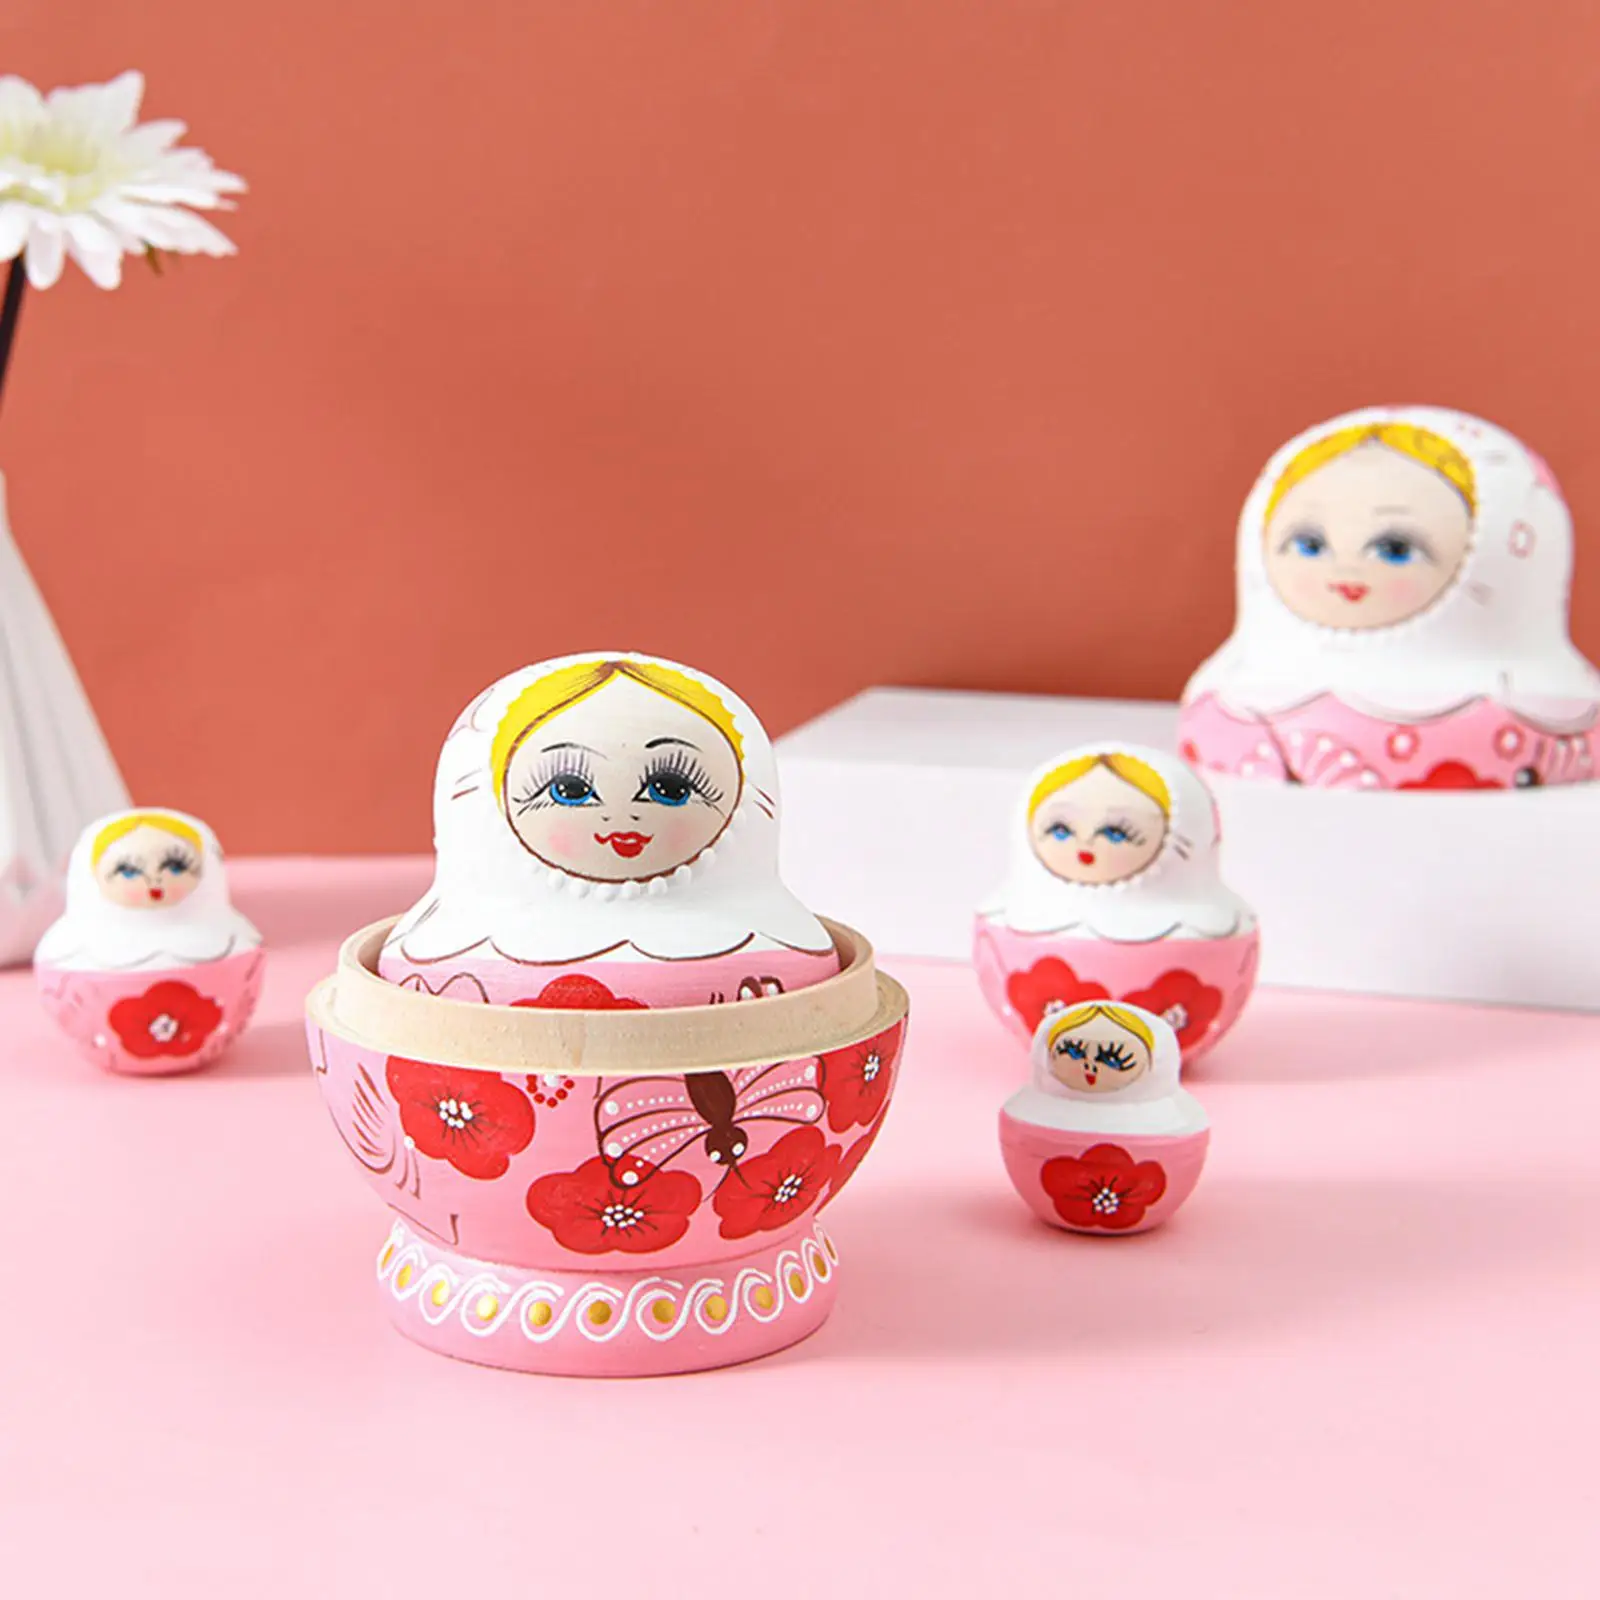 

Girls Nesting Dolls Stacking Doll 10Pcs Handpainted Housewarming Gifts Paintings Manually Done Home Decoration Popular